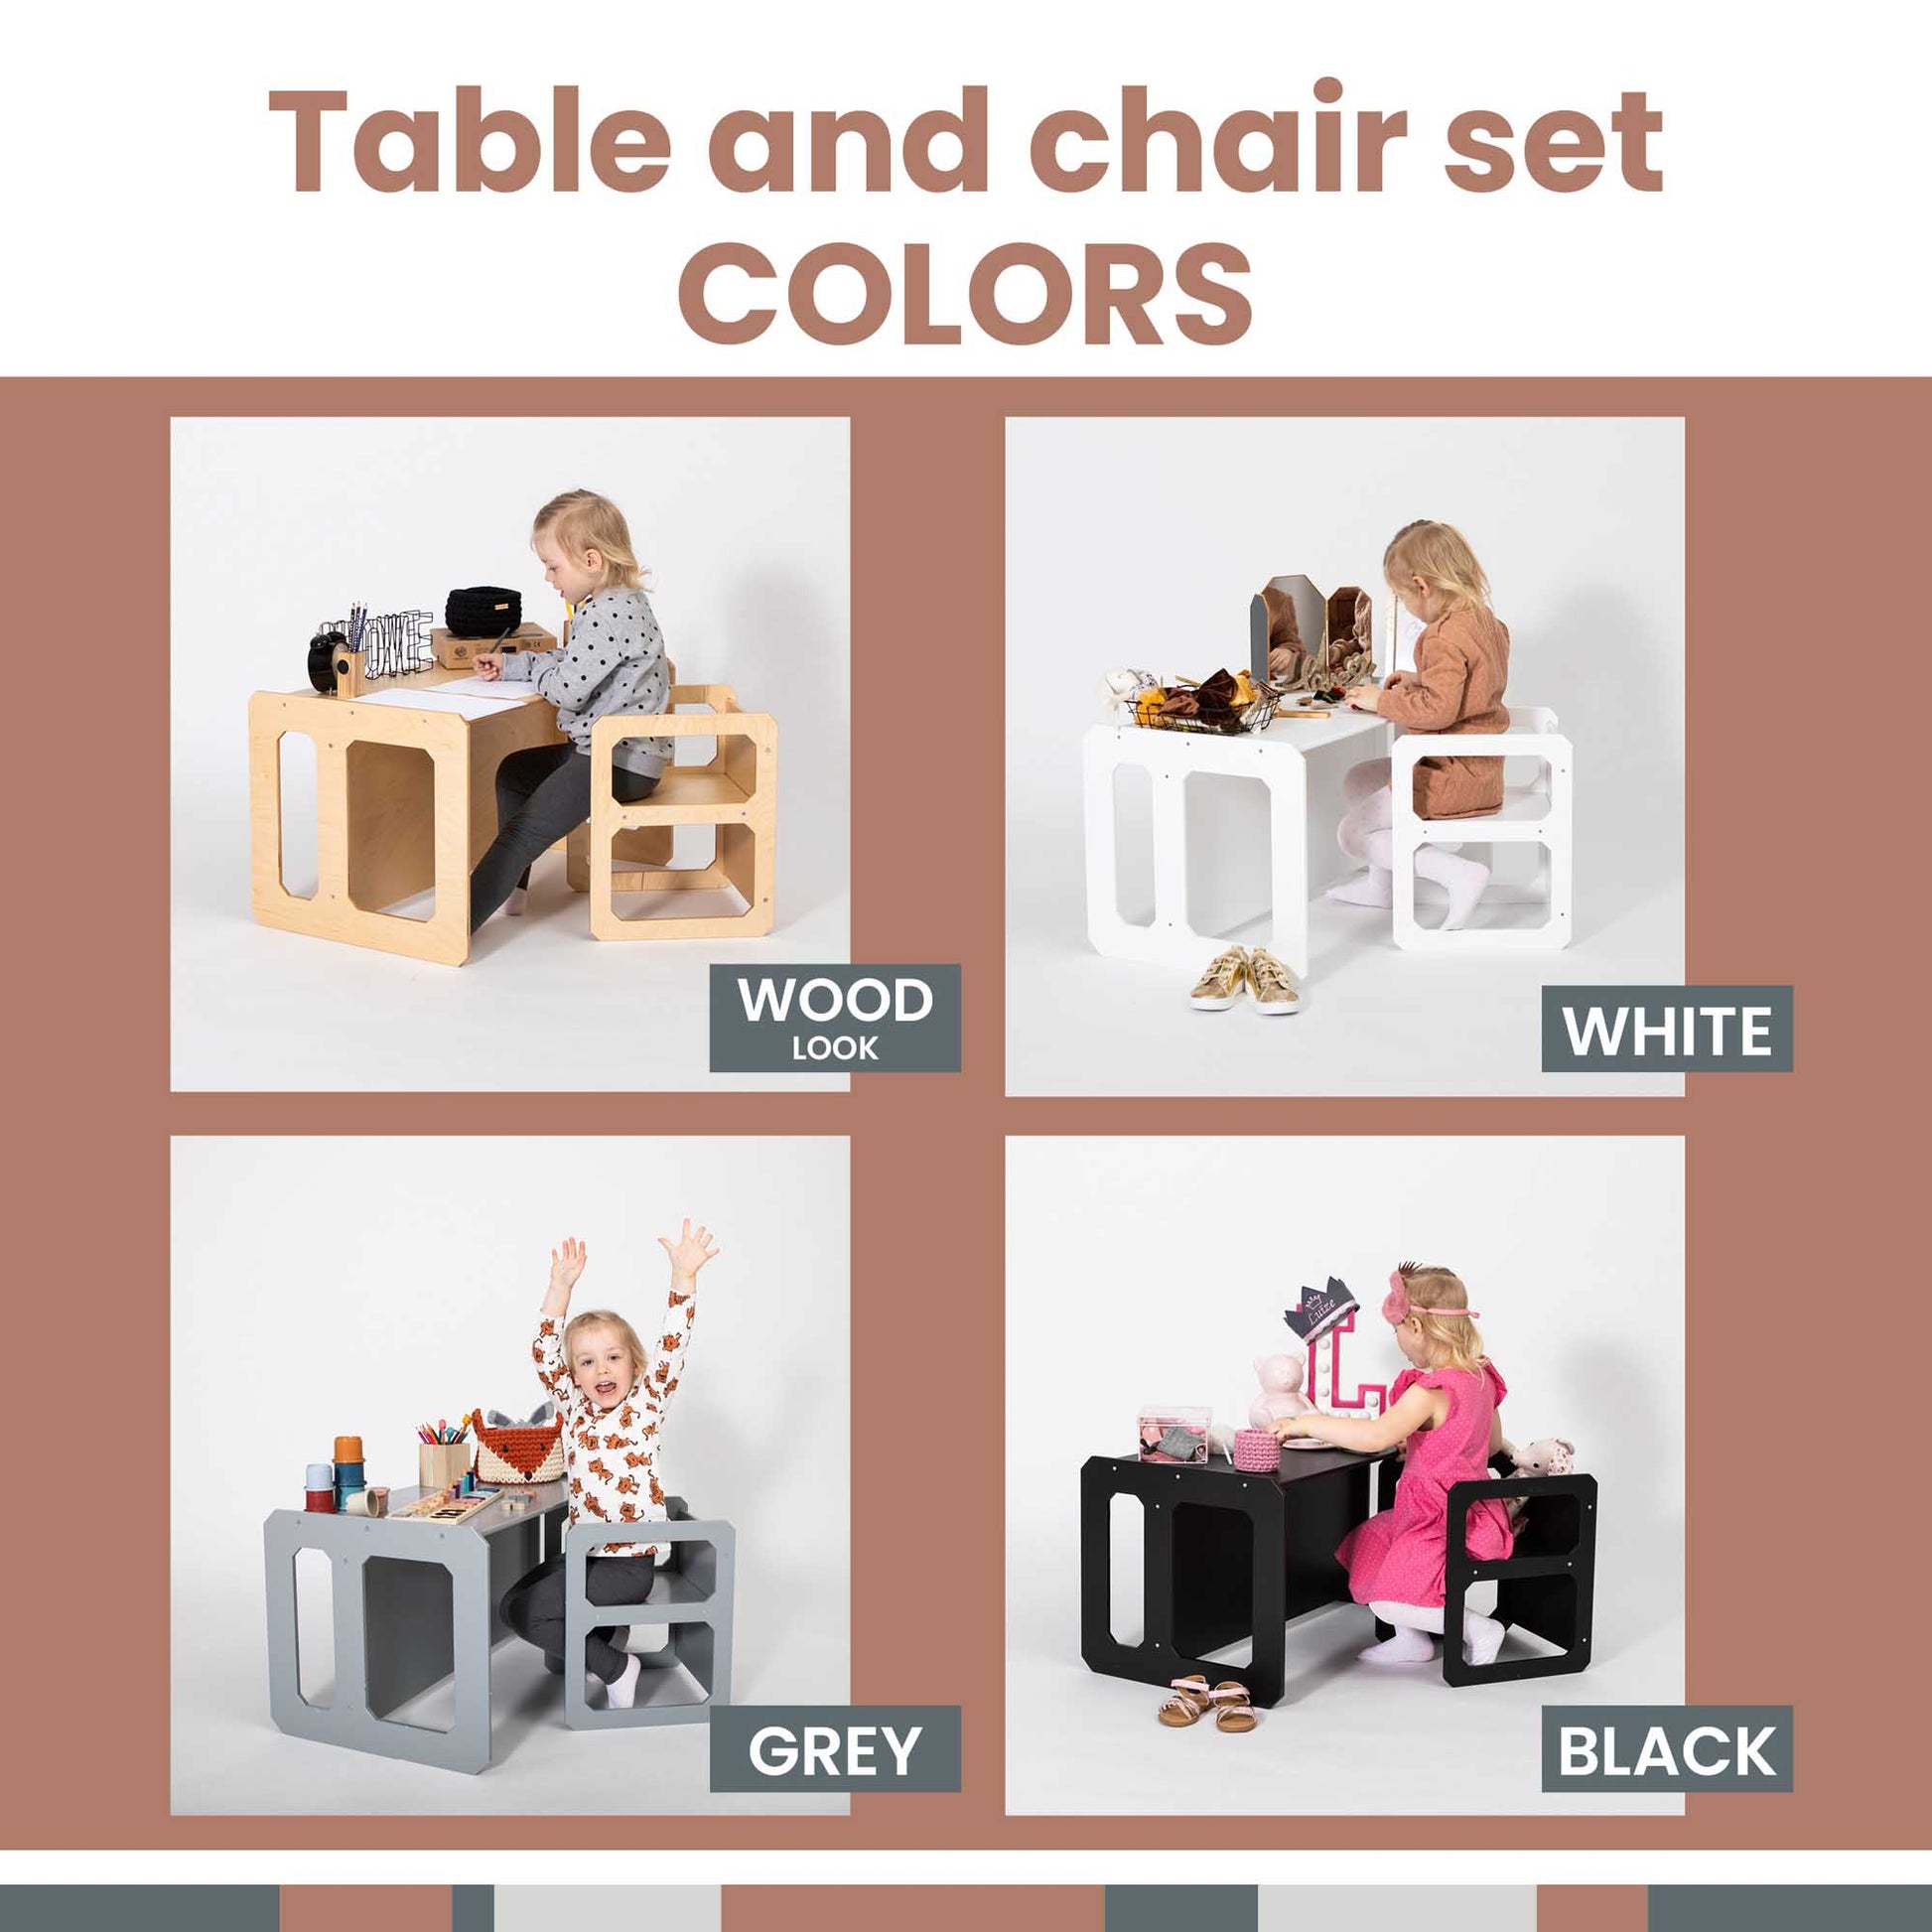 Montessori-inspired weaning table and chair set available in a variety of colors for toddlers to encourage independence.